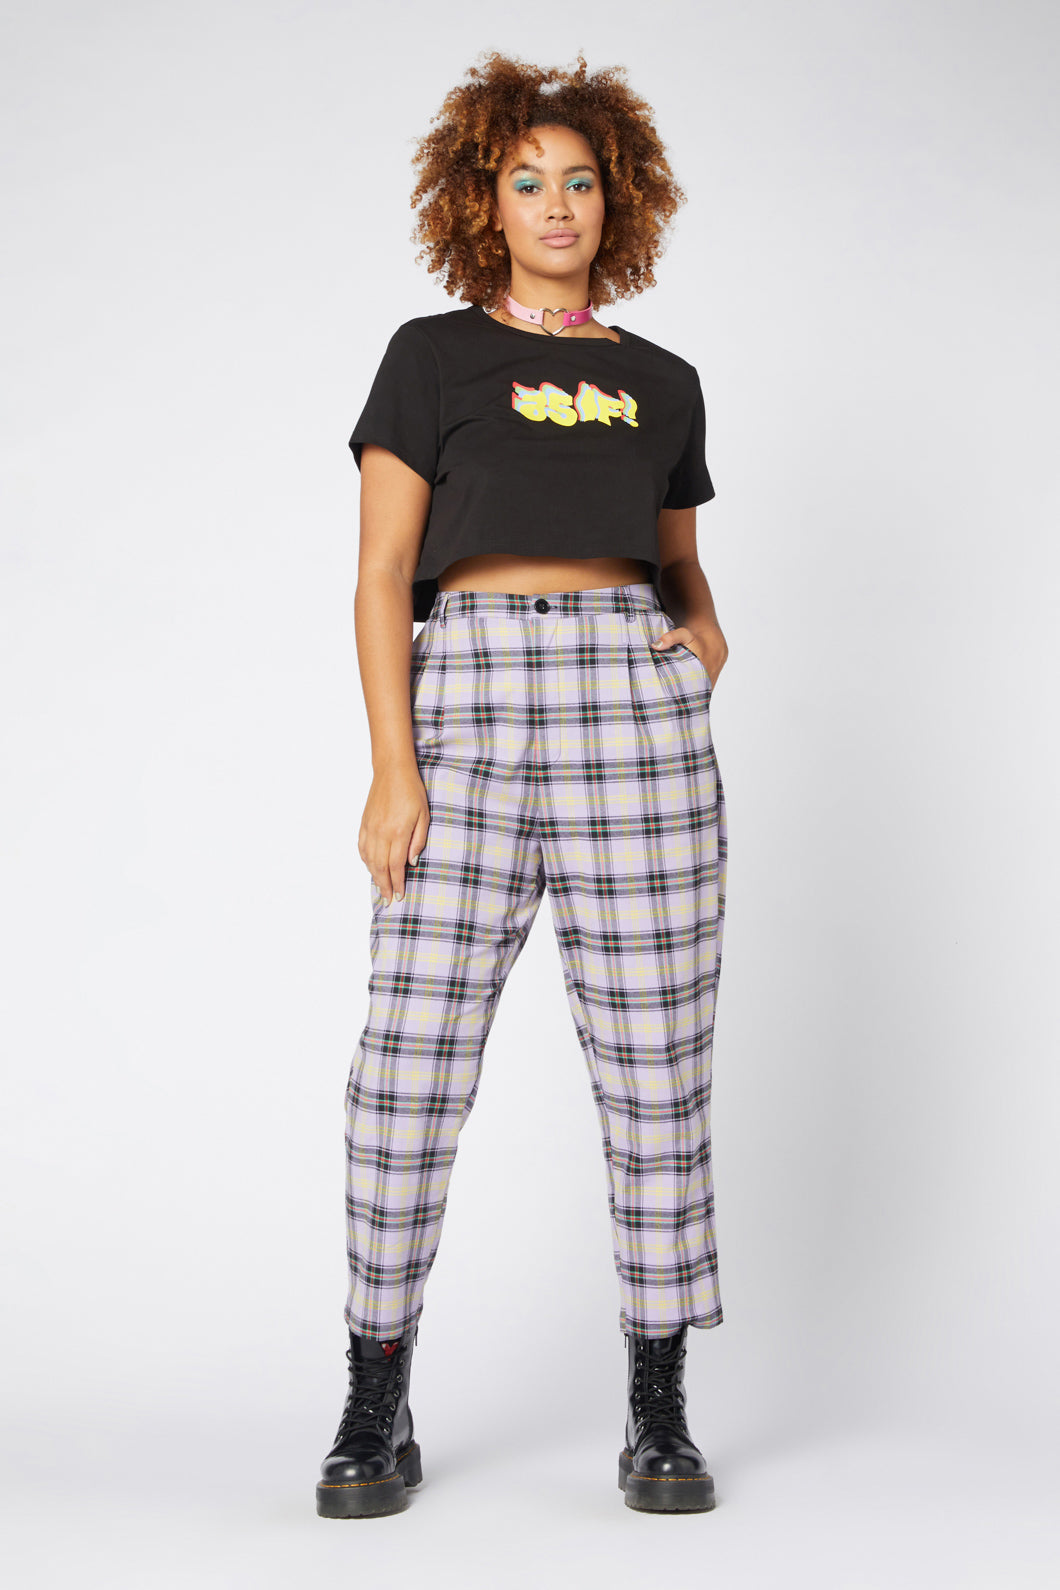 PALSCO Solid, Checkered Women Black, White Track Pants - Buy PALSCO Solid, Checkered  Women Black, White Track Pants Online at Best Prices in India | Flipkart.com